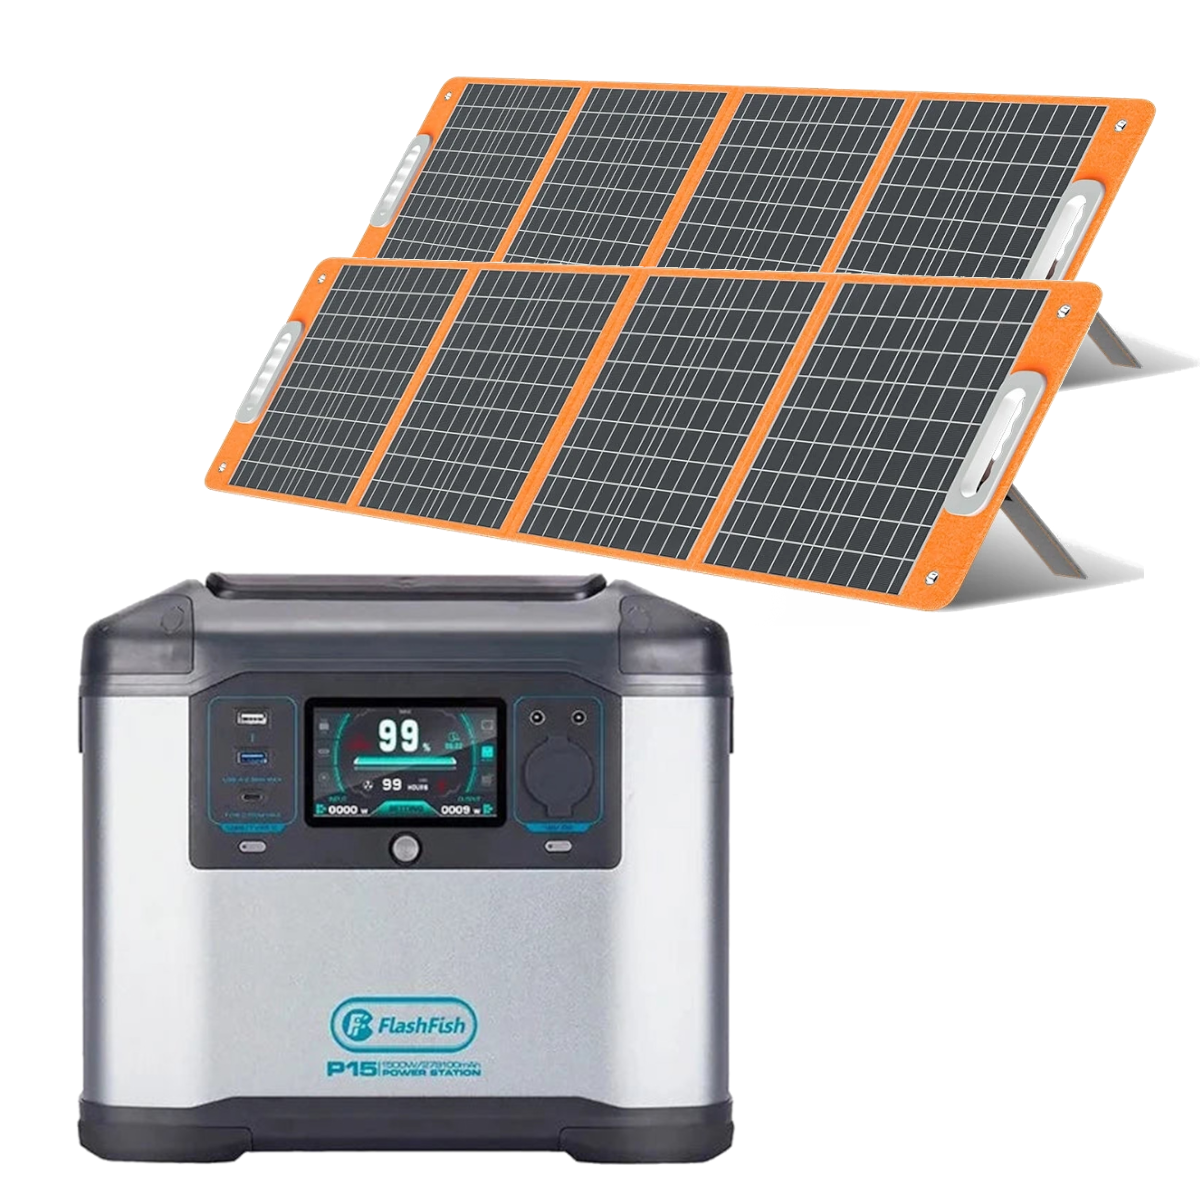 [EU Direct] FlashFish P15 1500W 1008Wh Outdoor Power Station with 2Pcs TSP 18V 100W Foldable Solar Panel, 280000mAh Lithium-ion Cells Solar Generator 1500W AC Output 2500W Surge Large Capacity Emergency Mobile Night Market Portable Camping Energy Storage